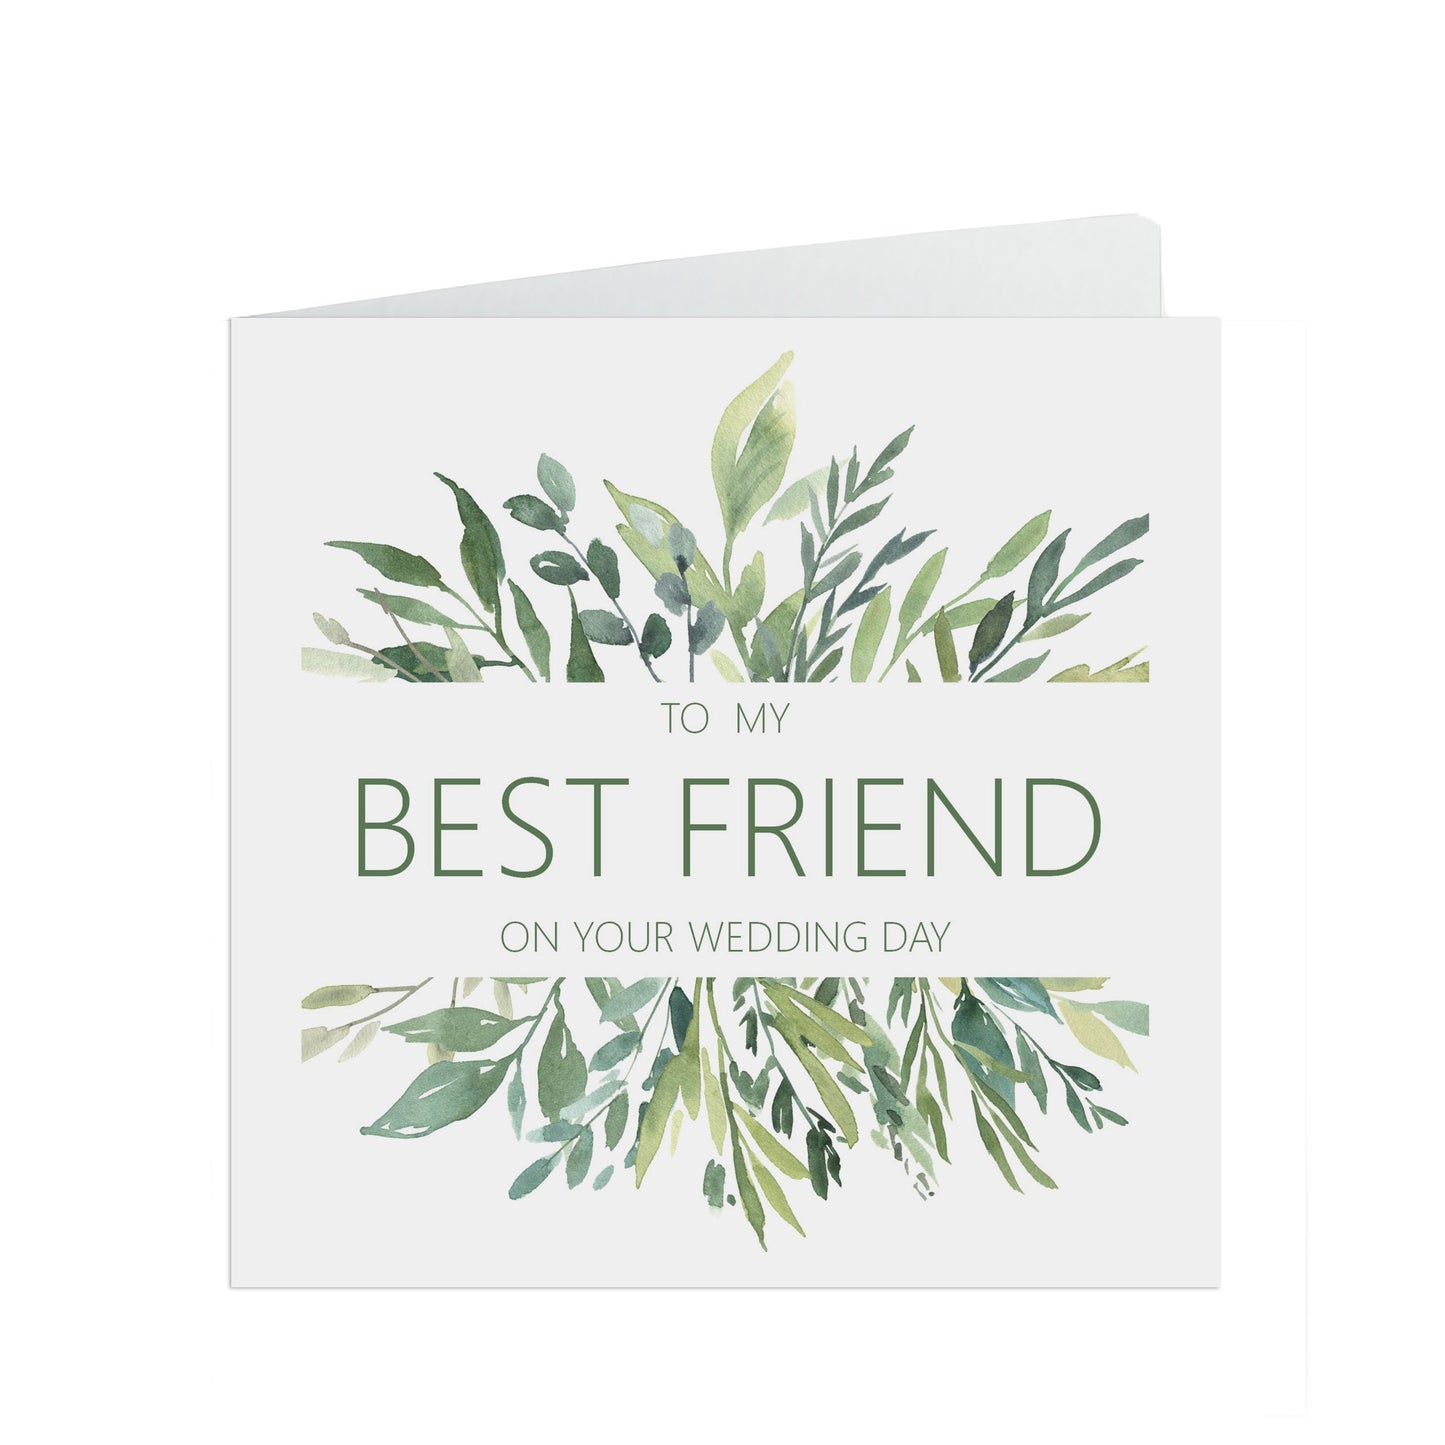 Best Friend On Our Wedding Day Card - Greenery